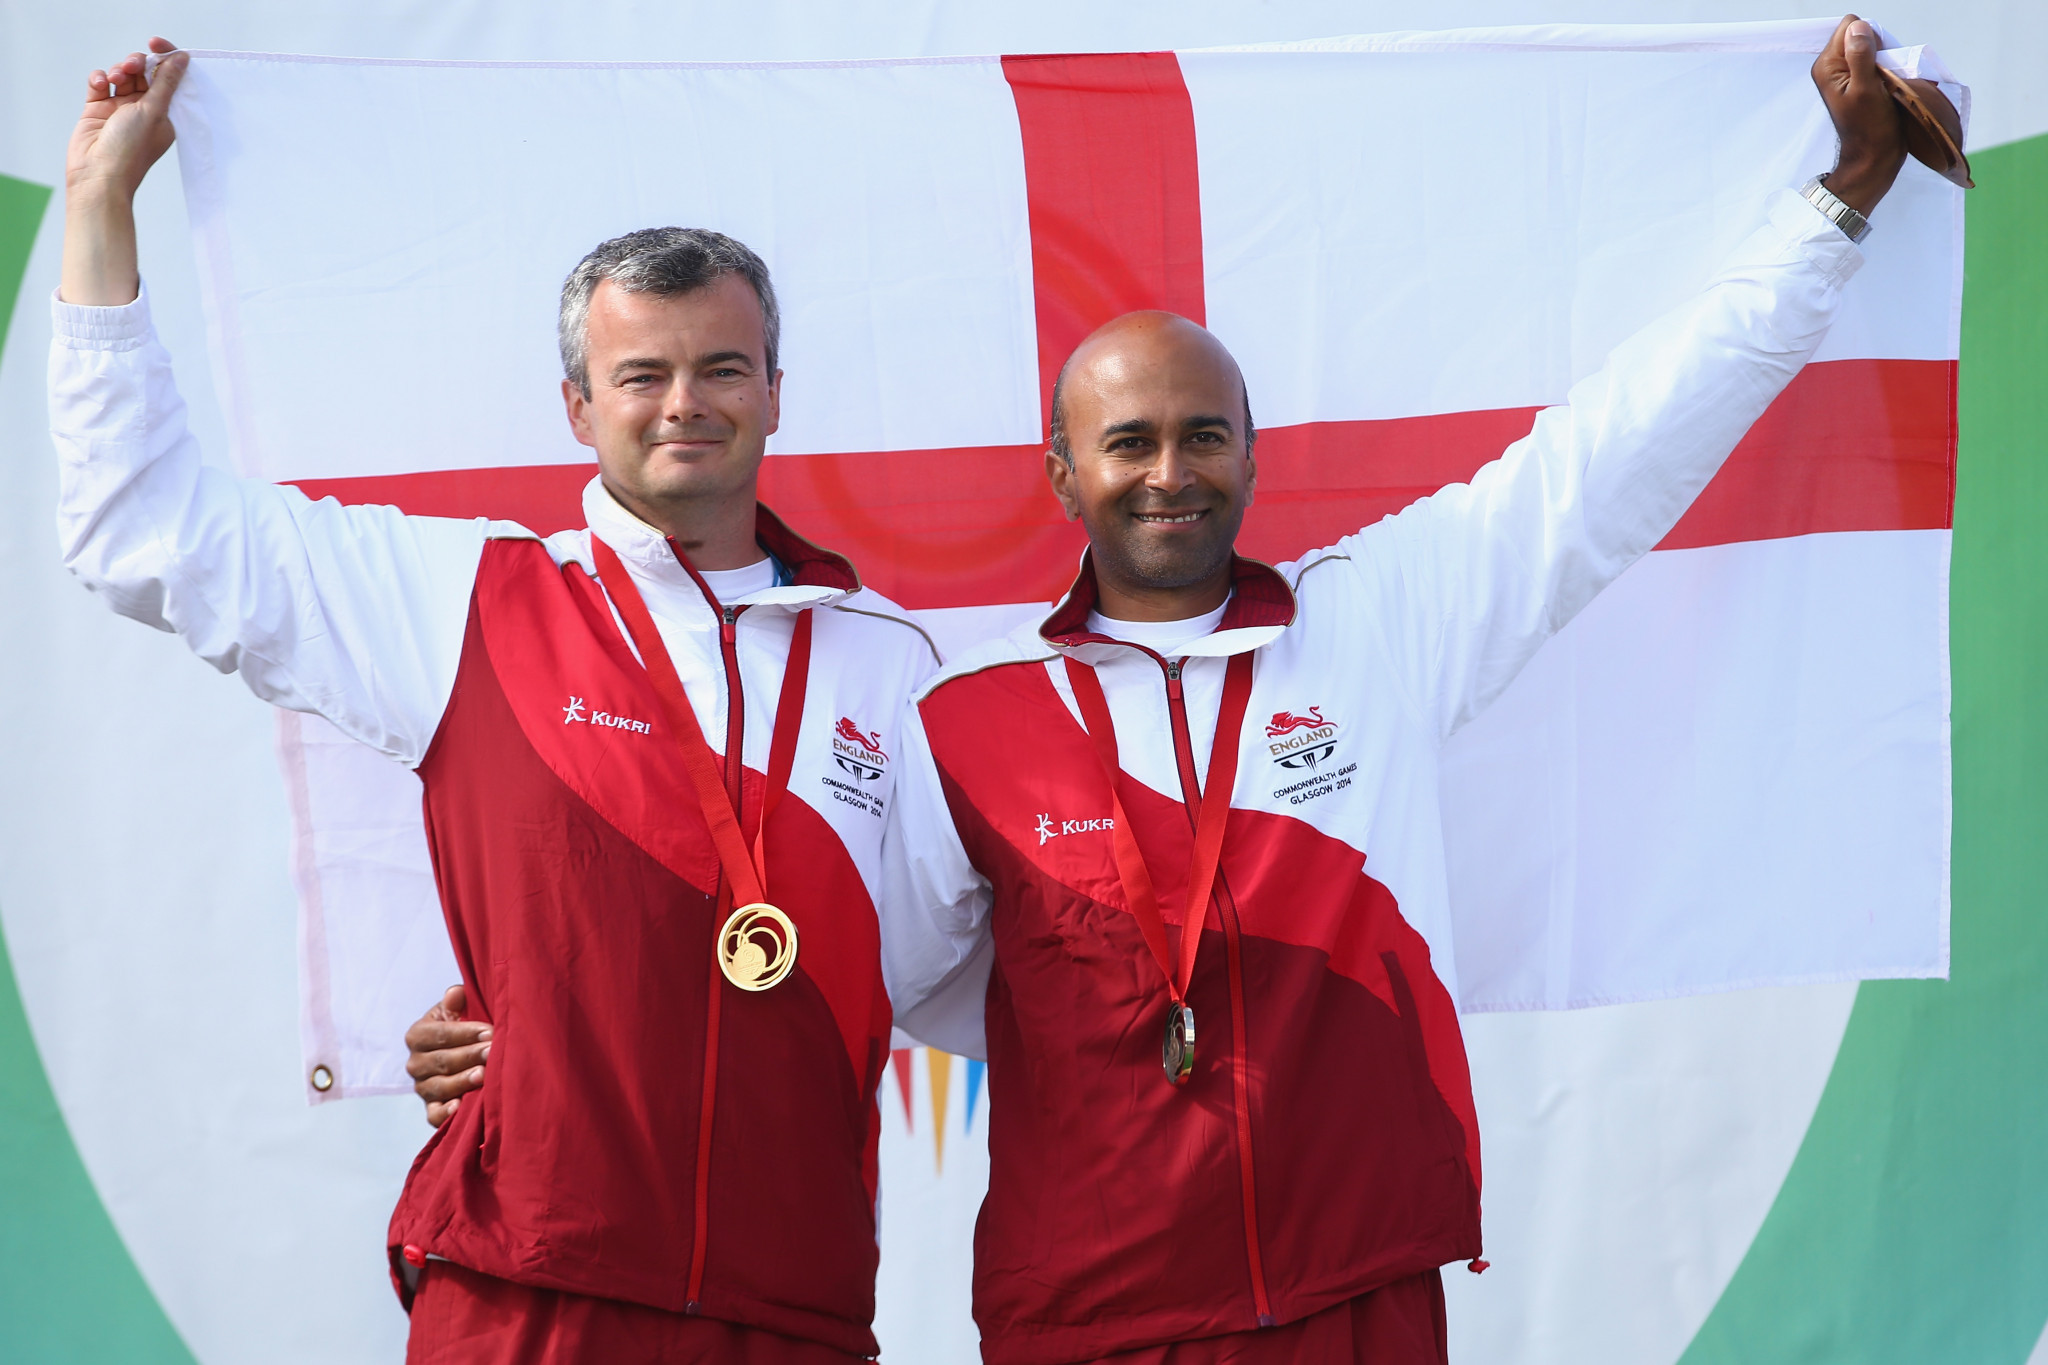 England's Parag Patel and David Luckman won the Queen's prize pairs event ©Getty Images